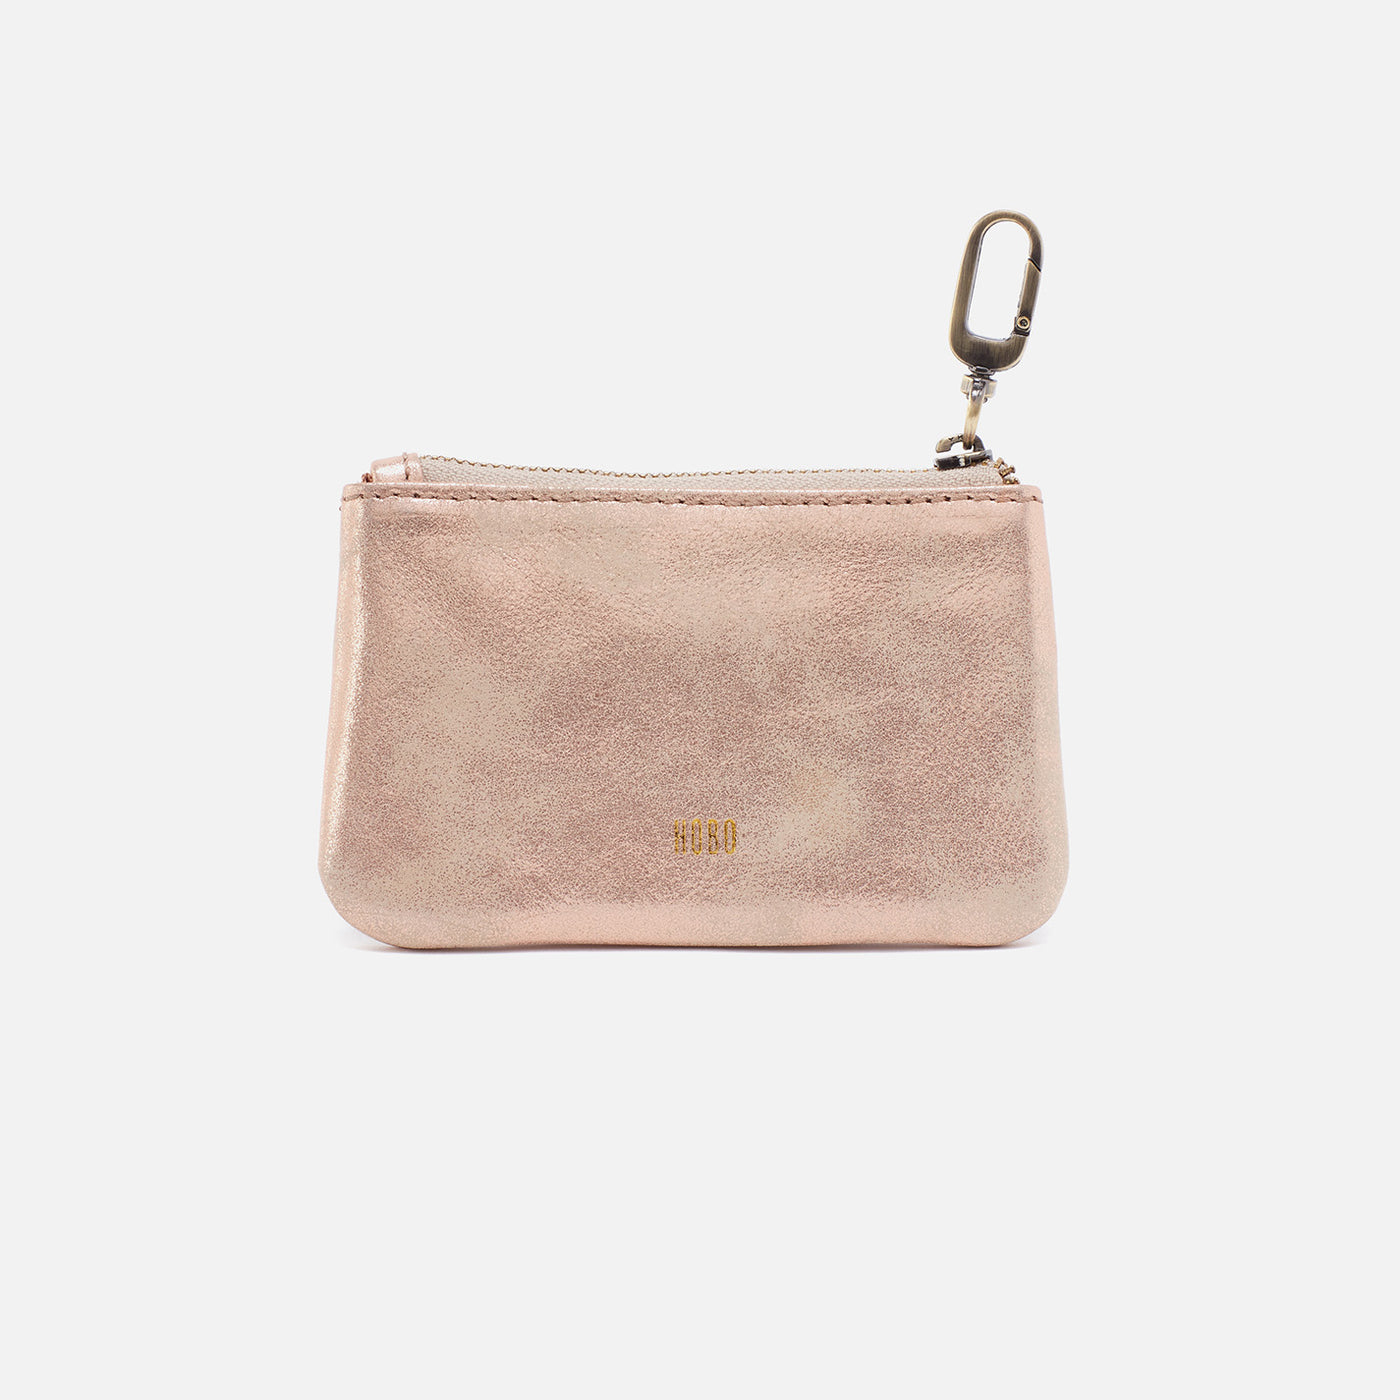 Monogram Pouch in Metallic Soft Leather - P